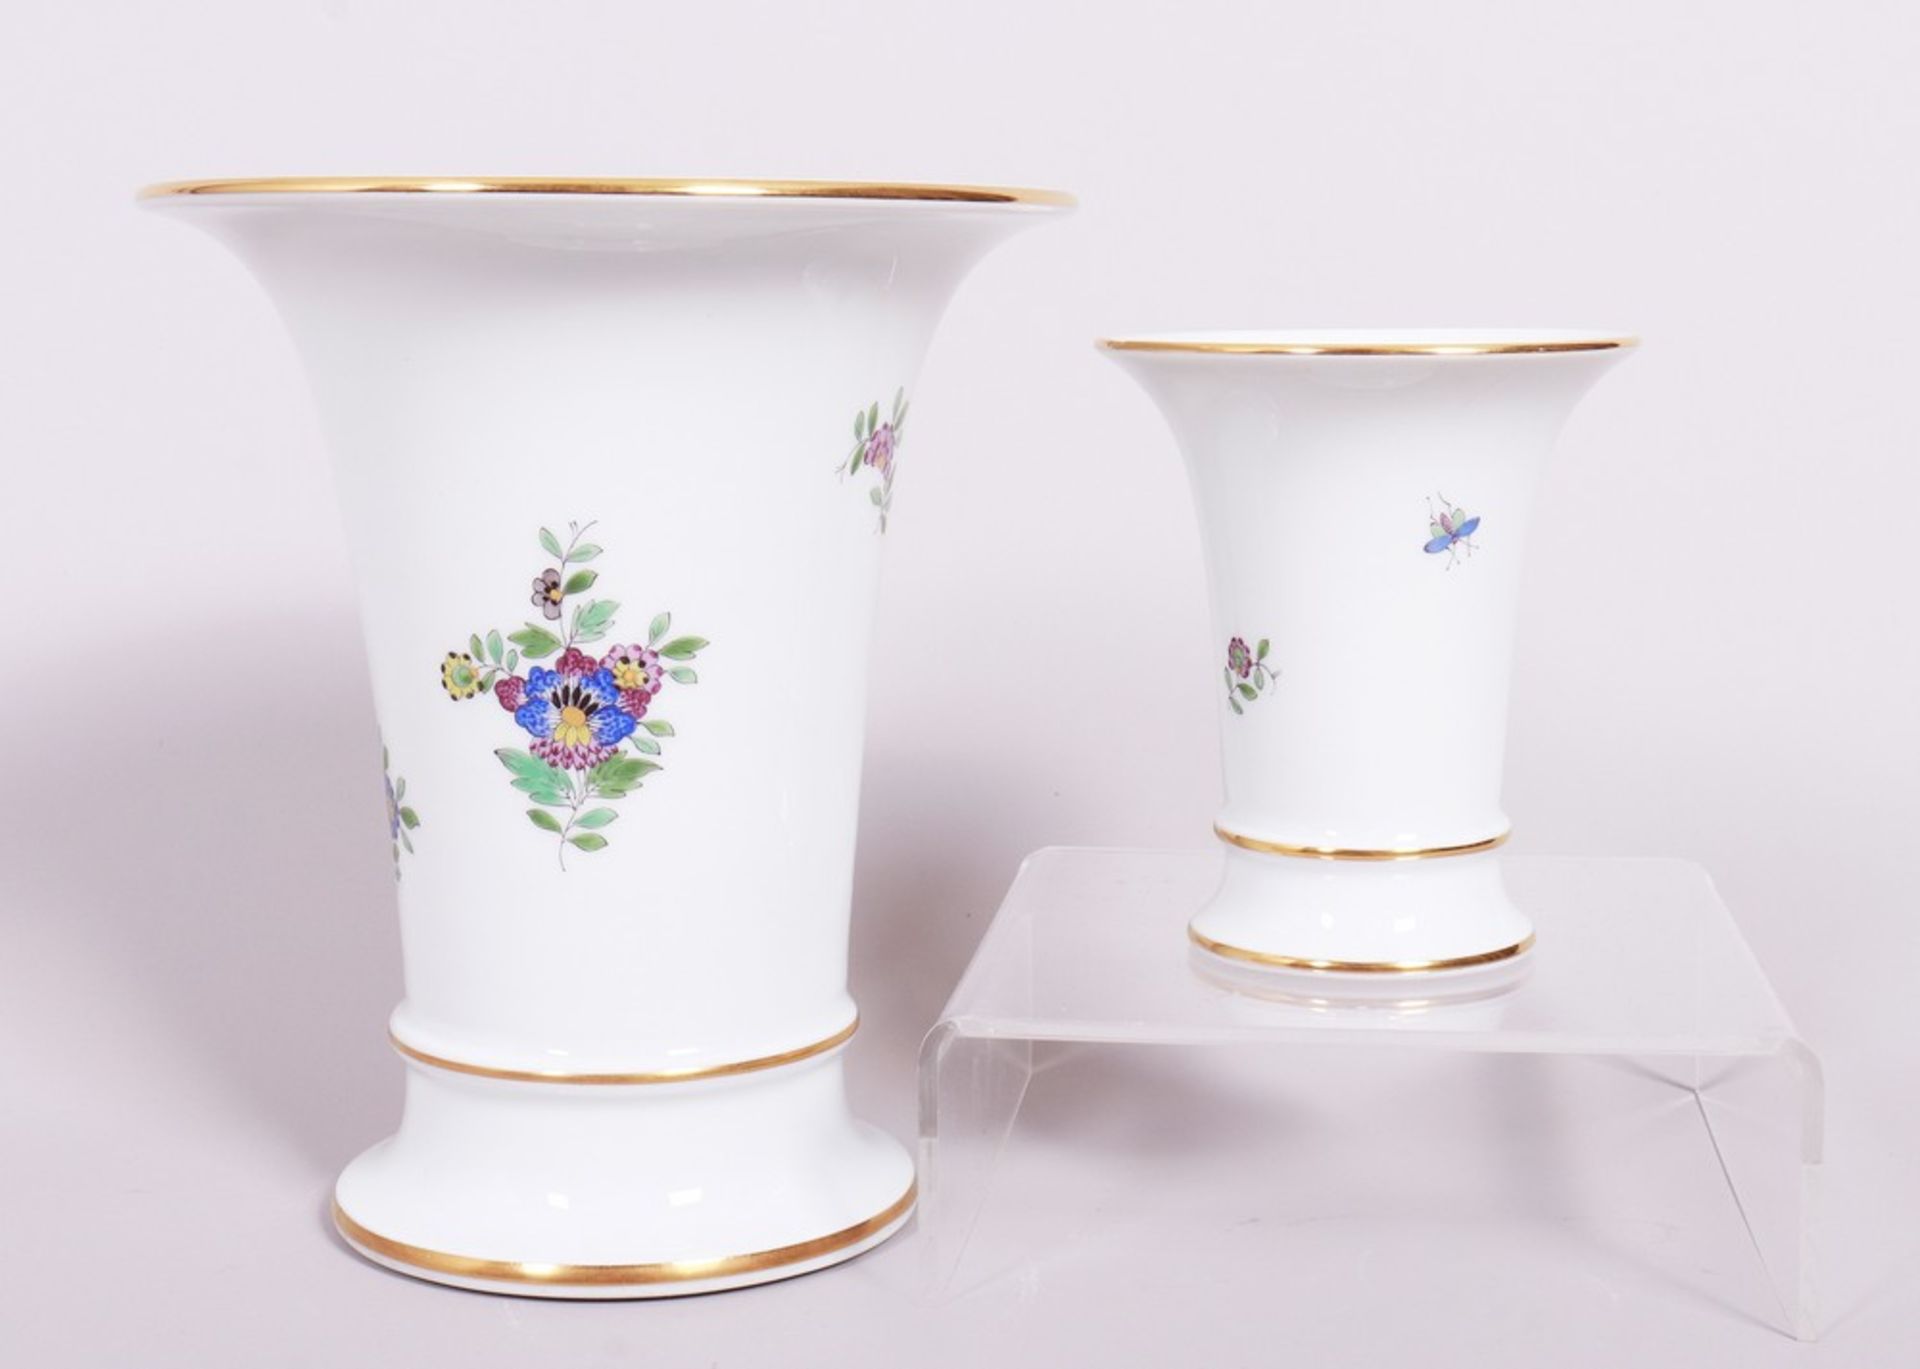 Small and large funnel vase, Meissen, "Kakiemon decor", 20th C. - Image 3 of 5